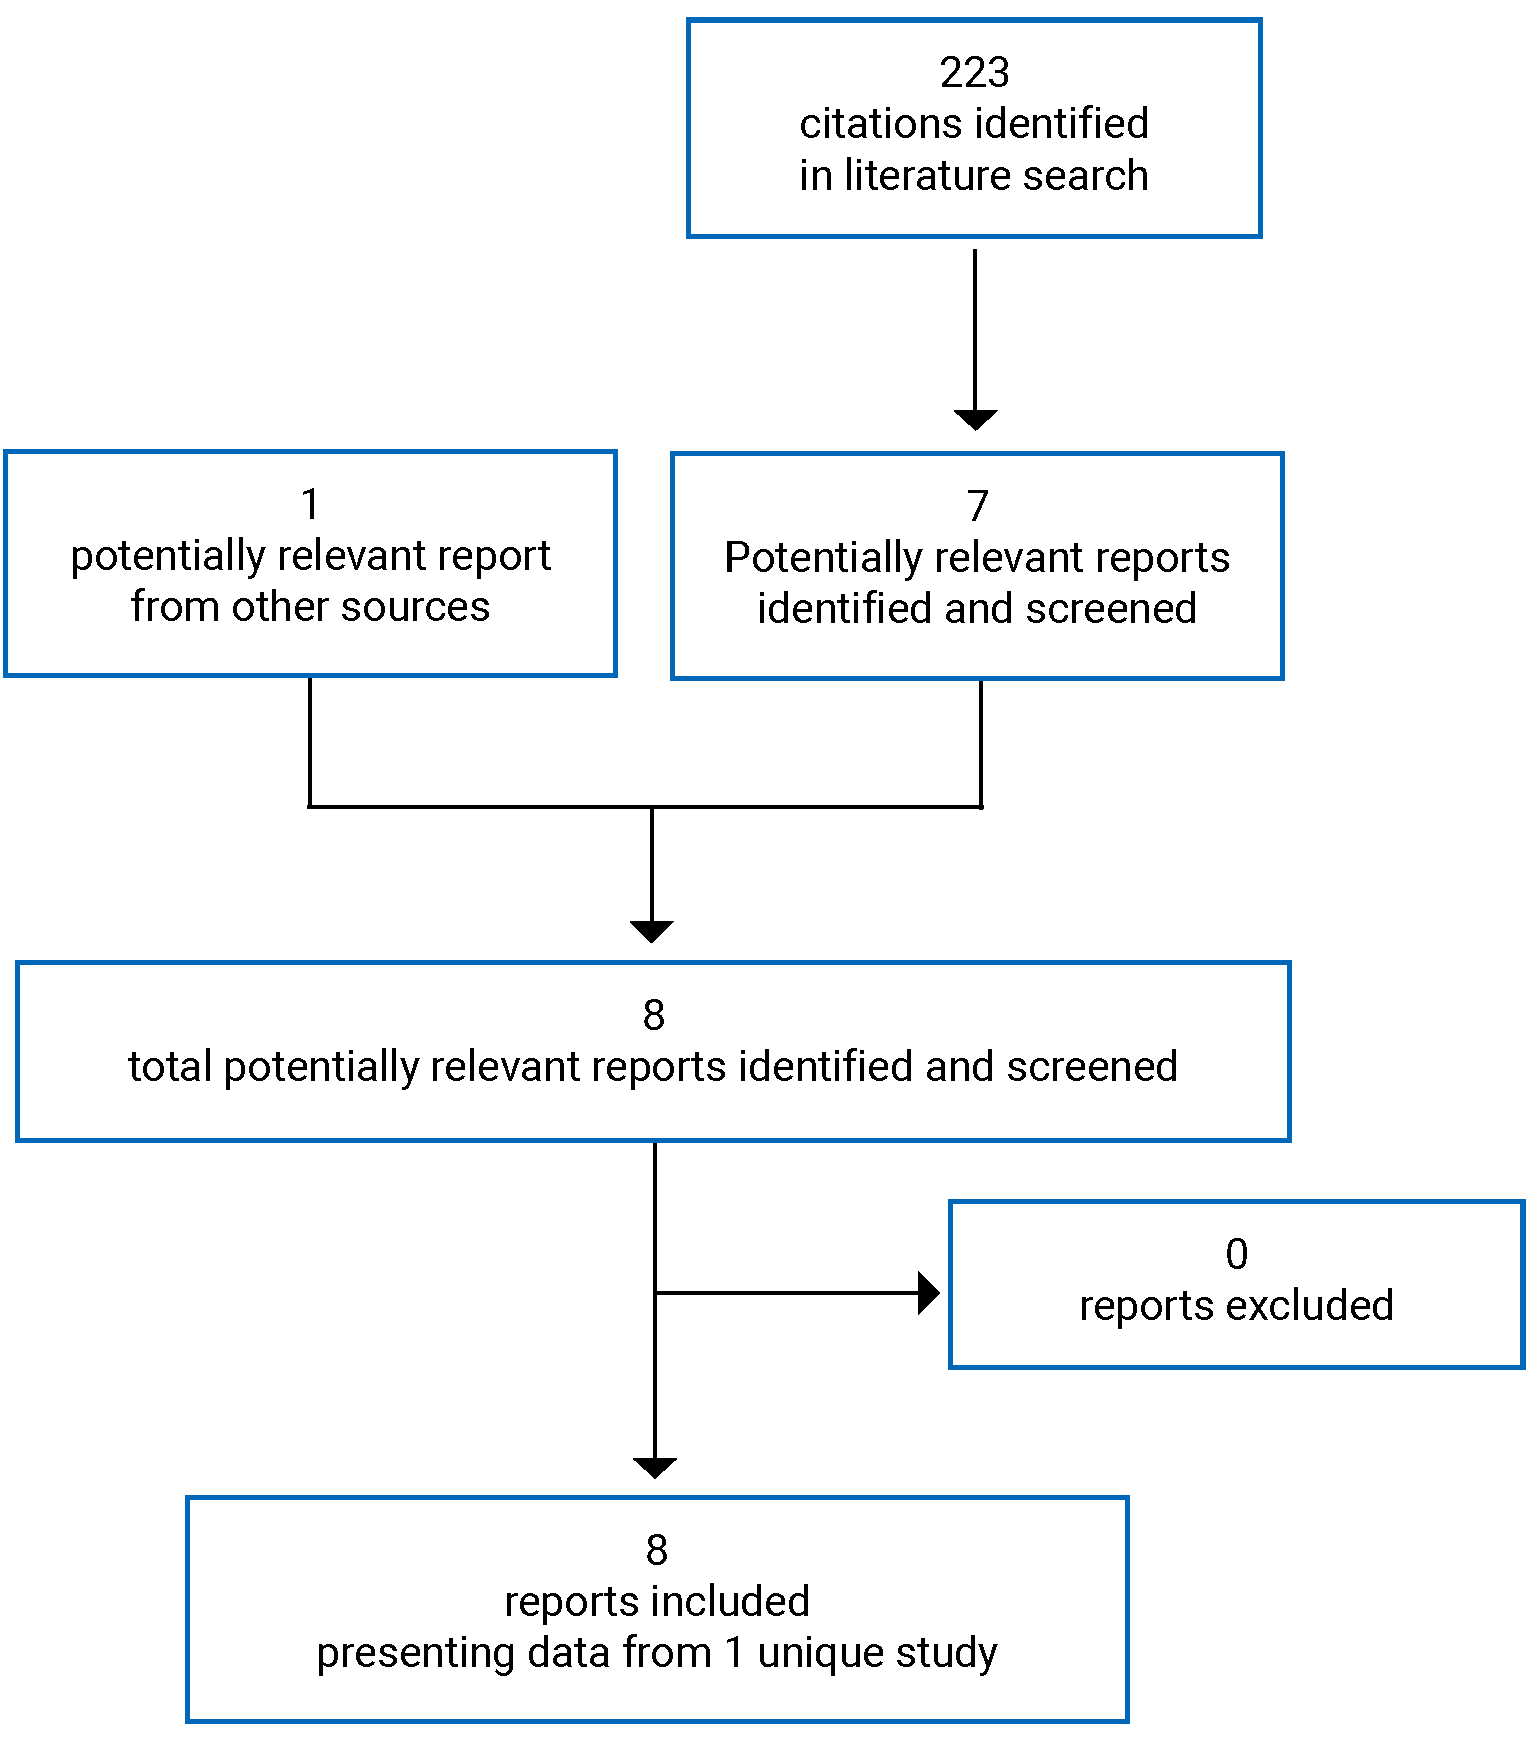 A total of 223 citations were identified in the literature search, from which 7 potentially relevant reports were identified. One additional potentially relevant report was identified from other sources. Of the 8 potentially relevant full-text reports retrieved for scrutiny, none were excluded. Eight reports presenting data from 1 unique study were included in the review.